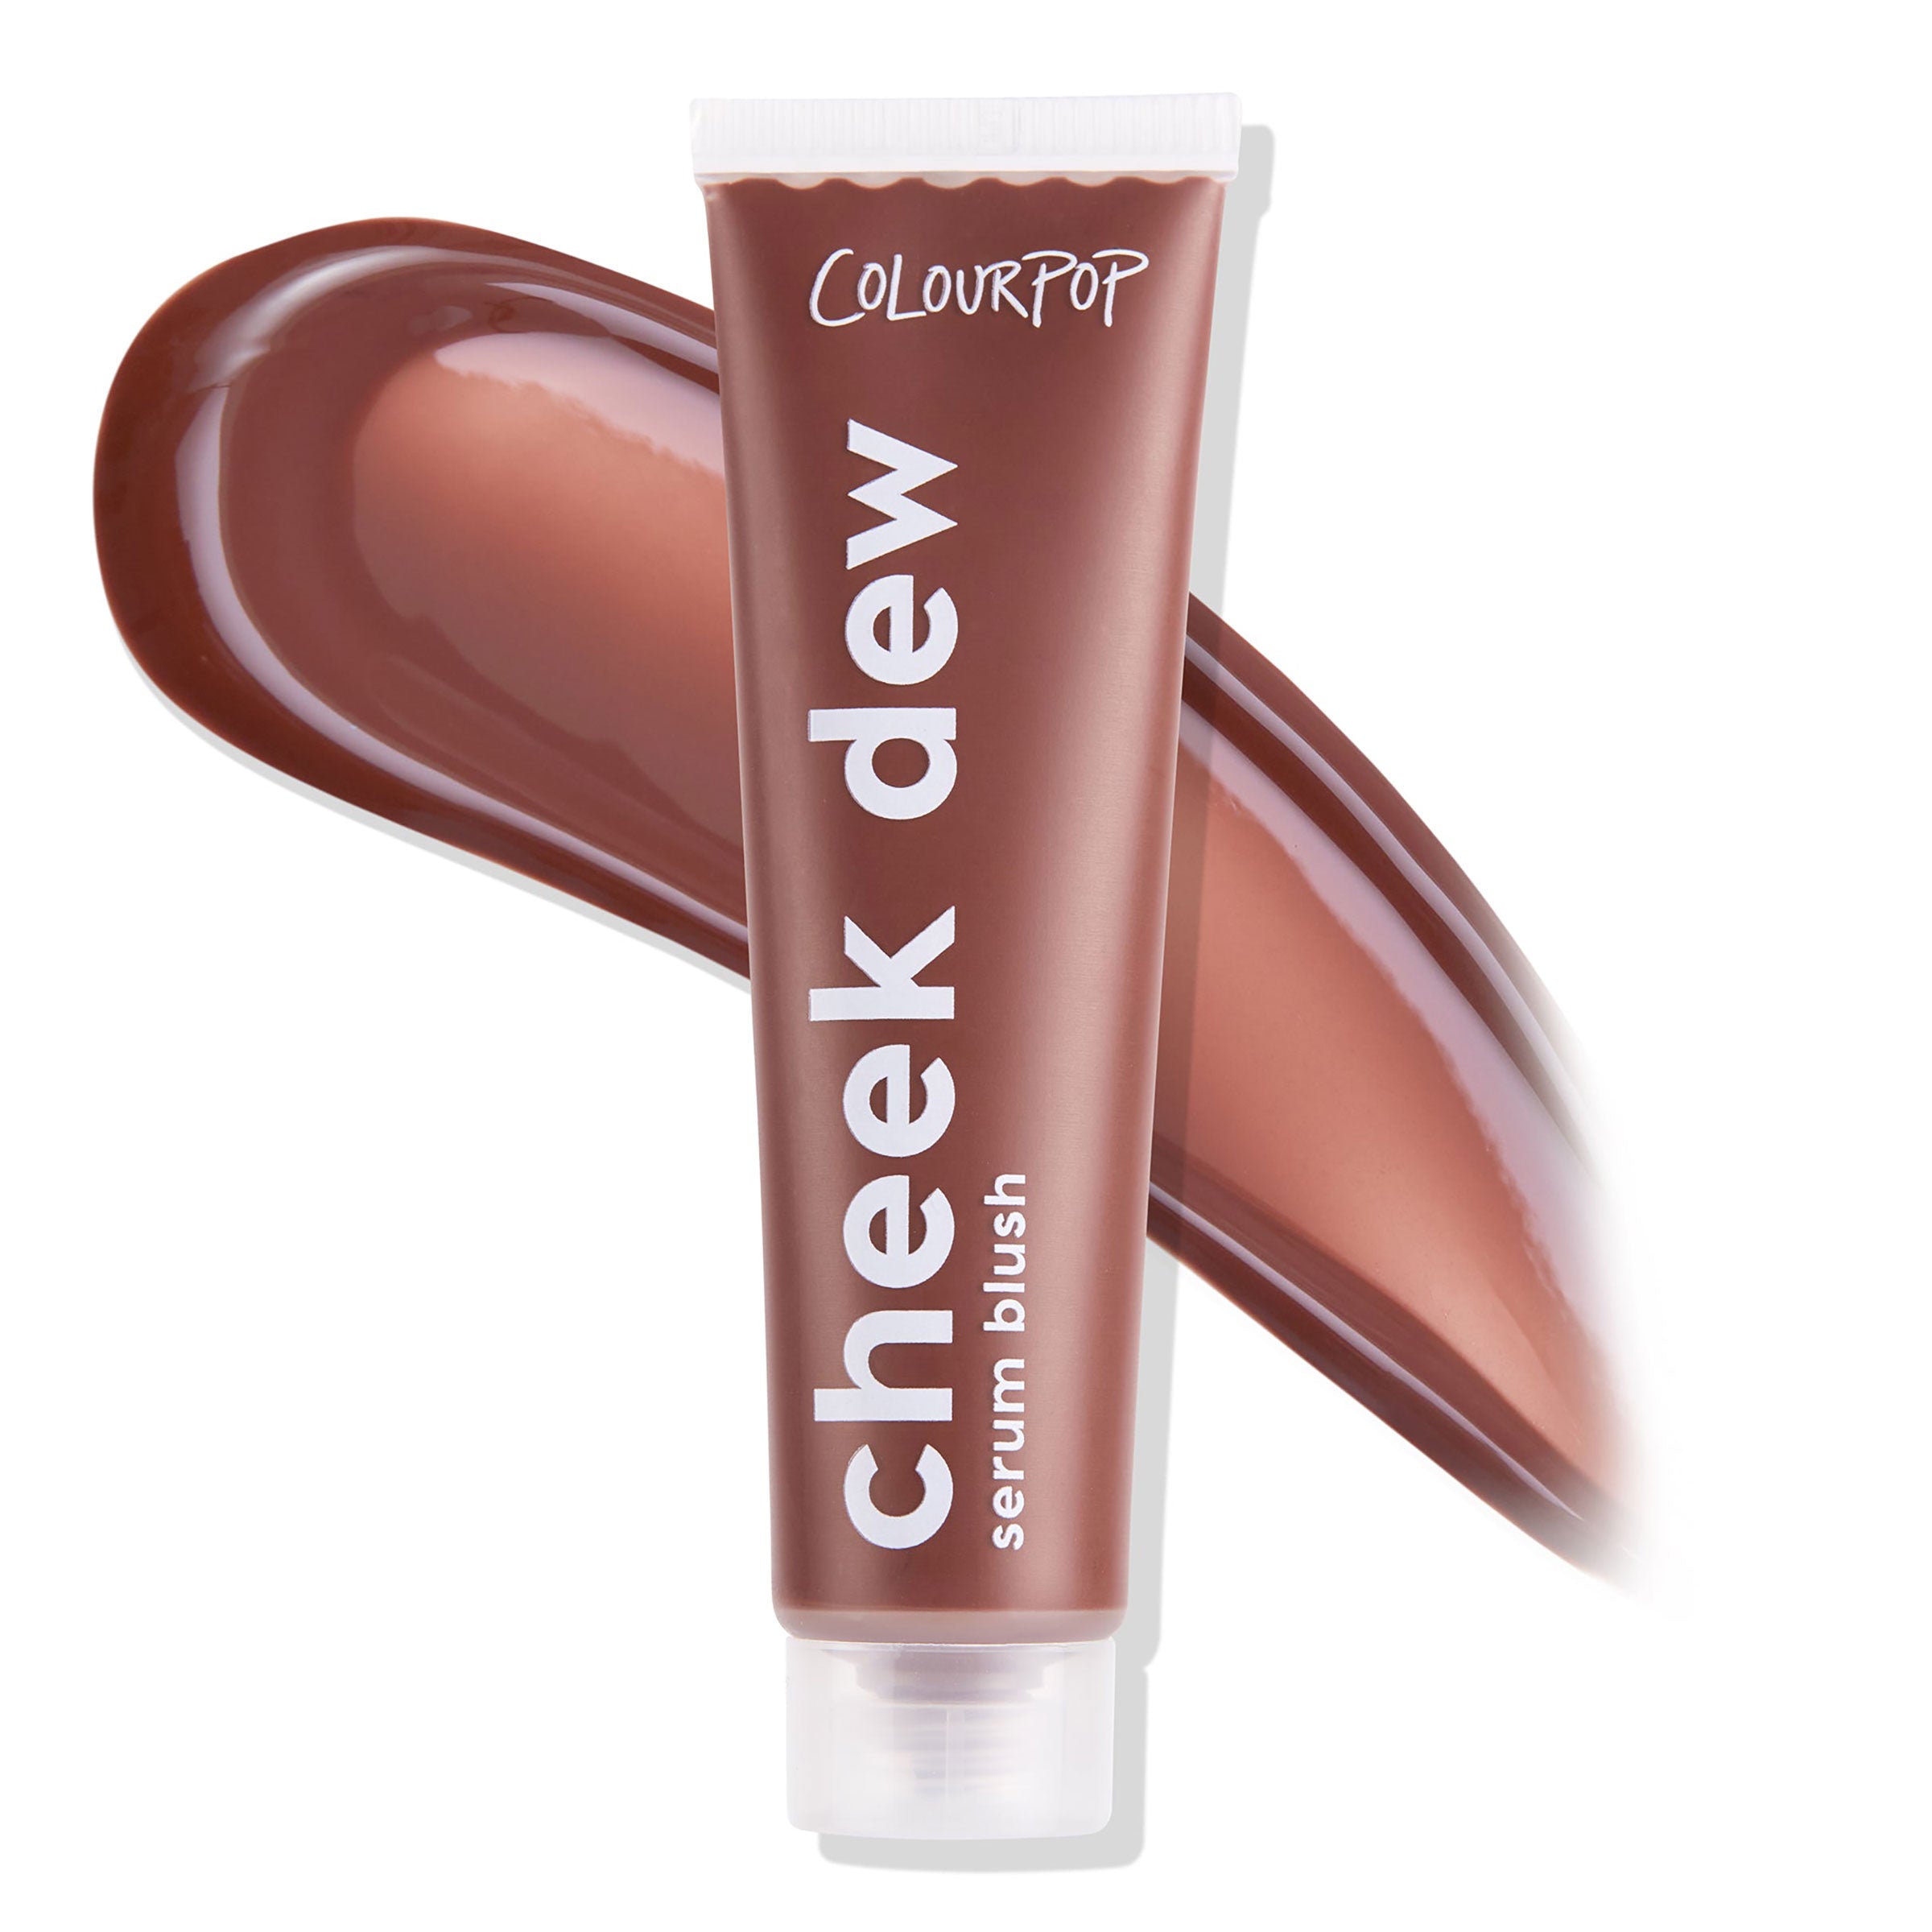 Colourpop Cheek Dew in Instant Crush. this innovative, mistake-proof liquid blush features a pillowy-soft formula that combines skin-loving ingredients with a dewy rush of colour! lightweight on the skin and buildable, customizable coverage leaves skin looking naturally flushed with a healthy-looking glow. its easy-to-use formula wears well over bare skin, concealer, or foundation and applies easily with a beauty sponge, brush, or fingertips!